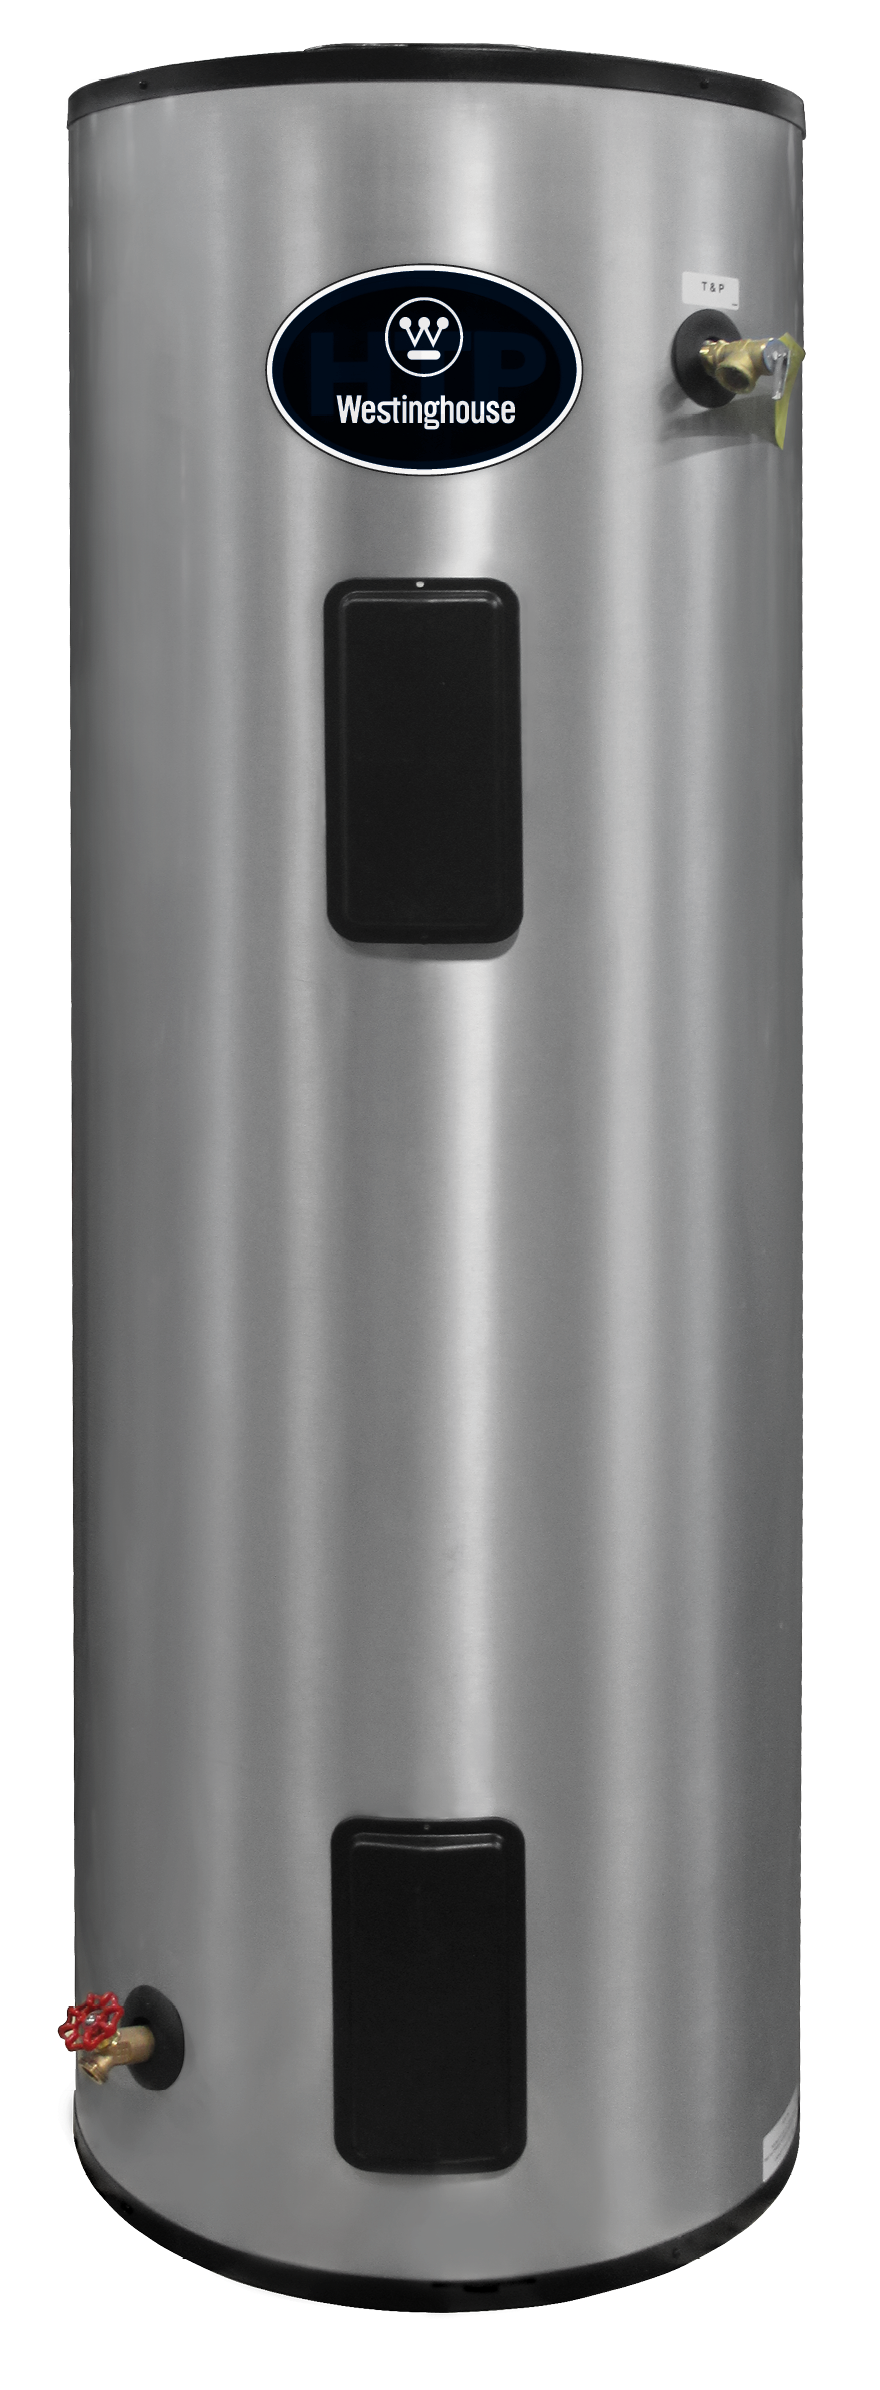 Westinghouse Water Heater